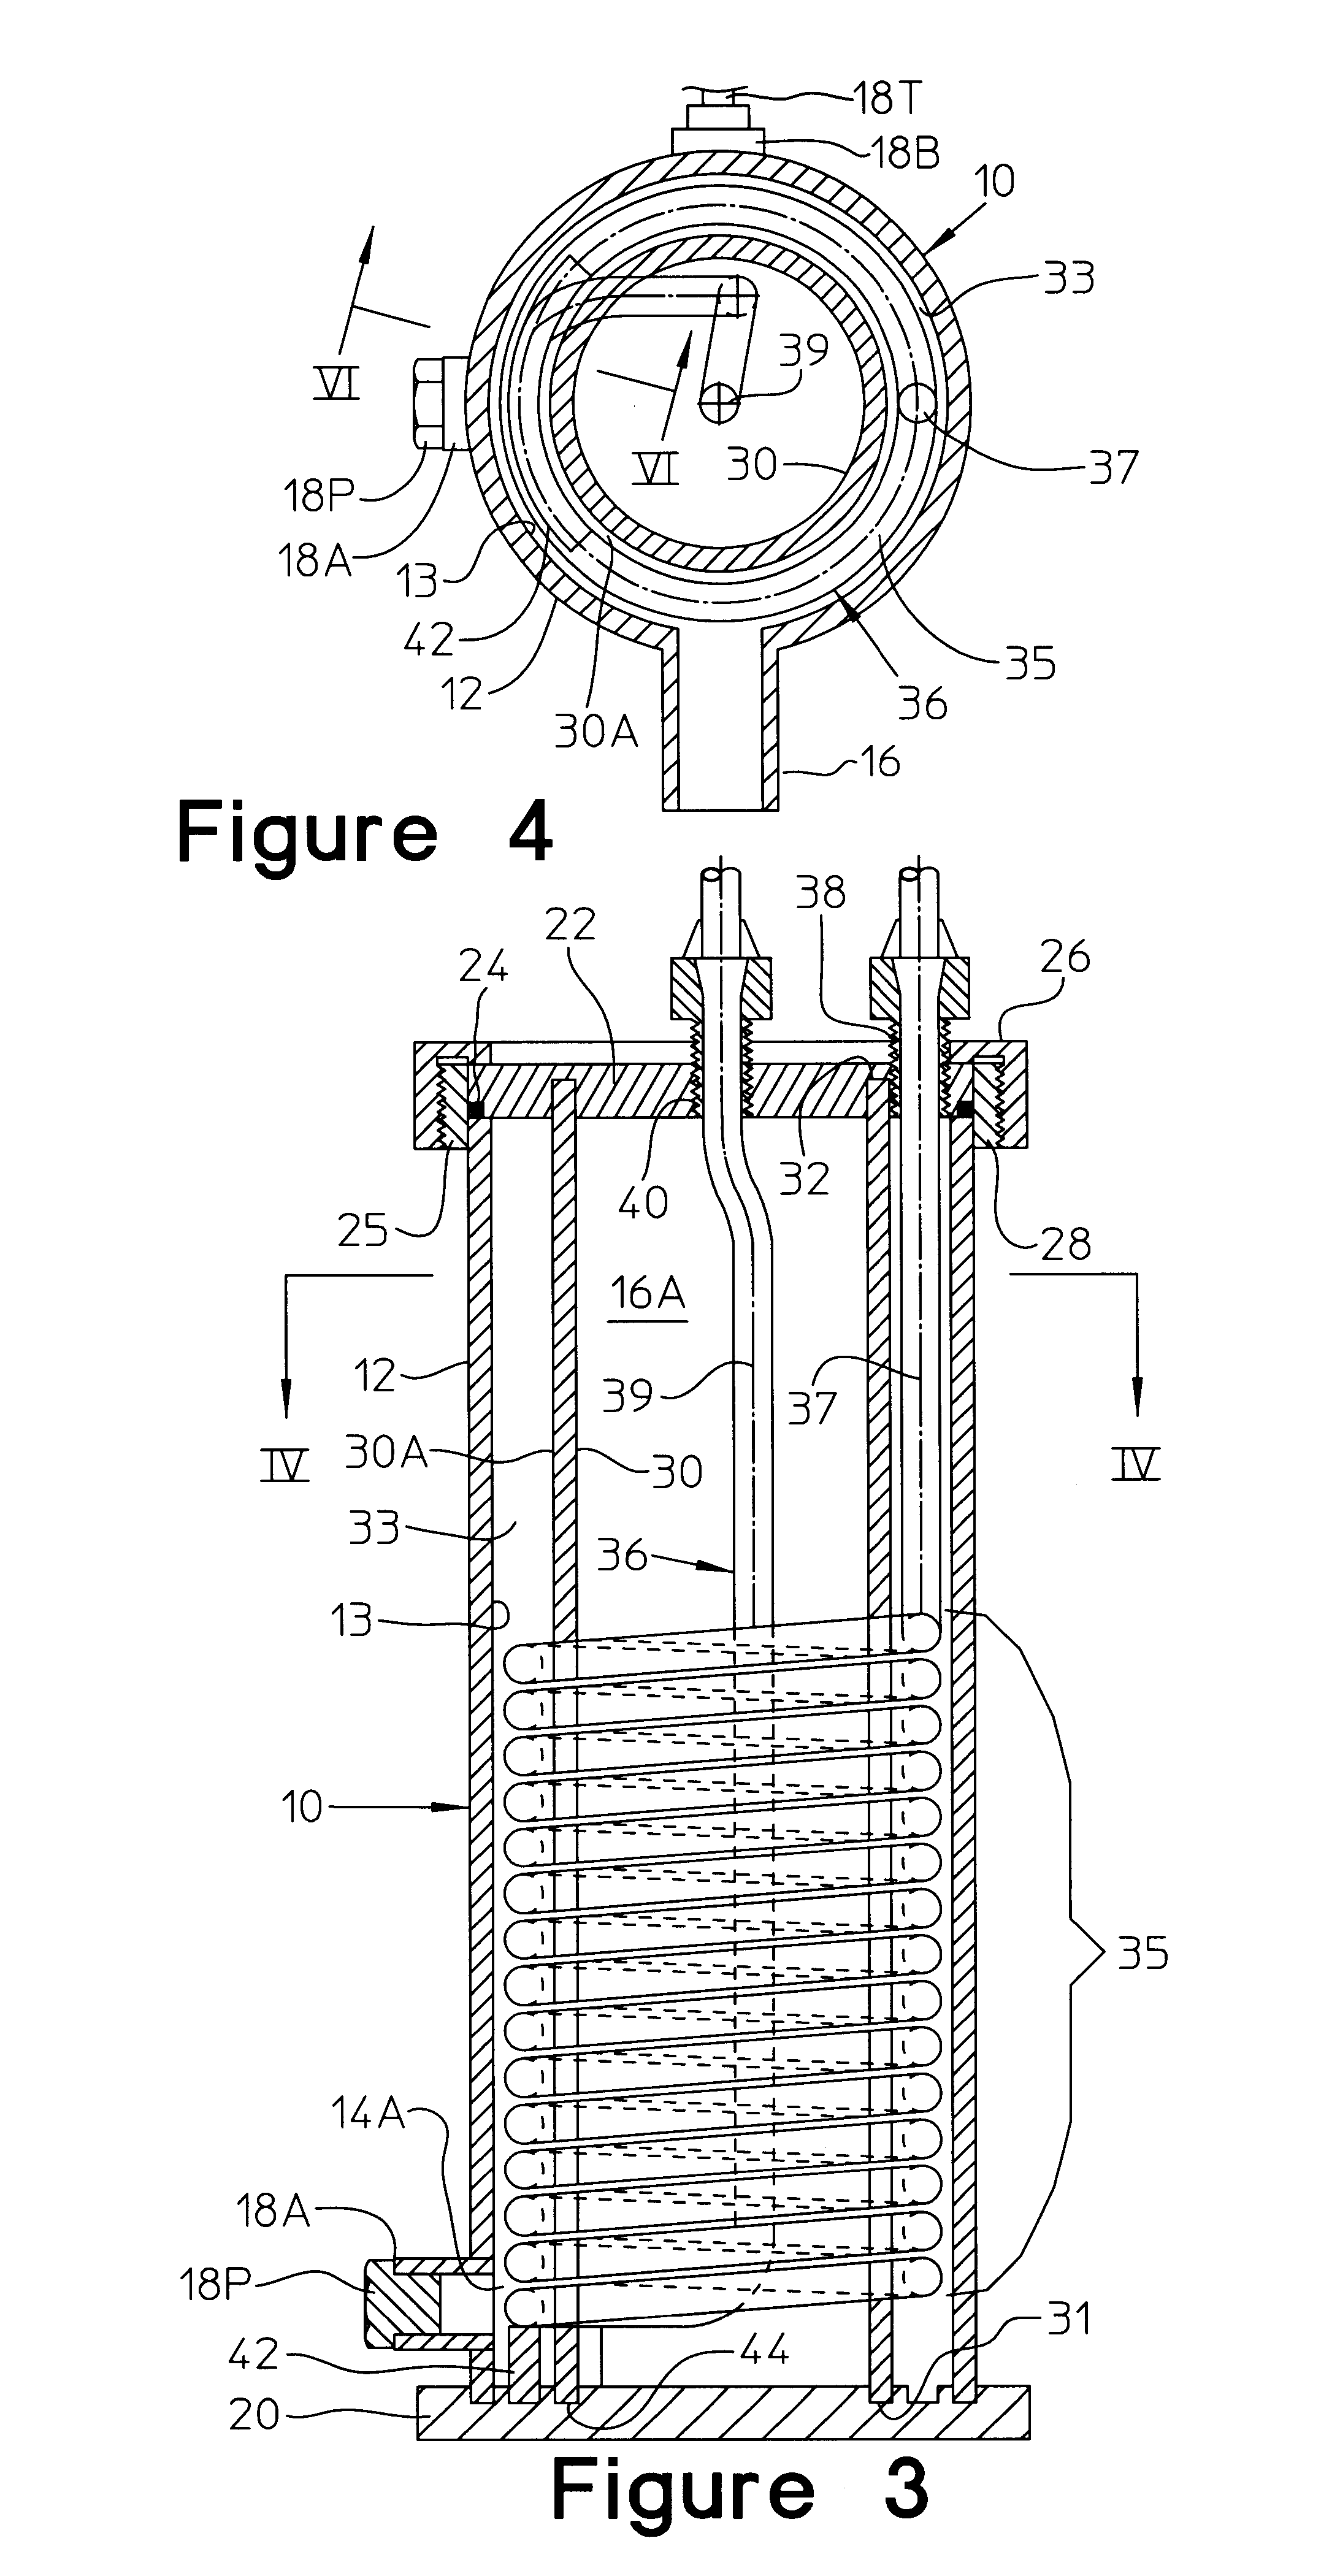 Method and apparatus for optimizing heat transfer in a tube and shell heat exchanger